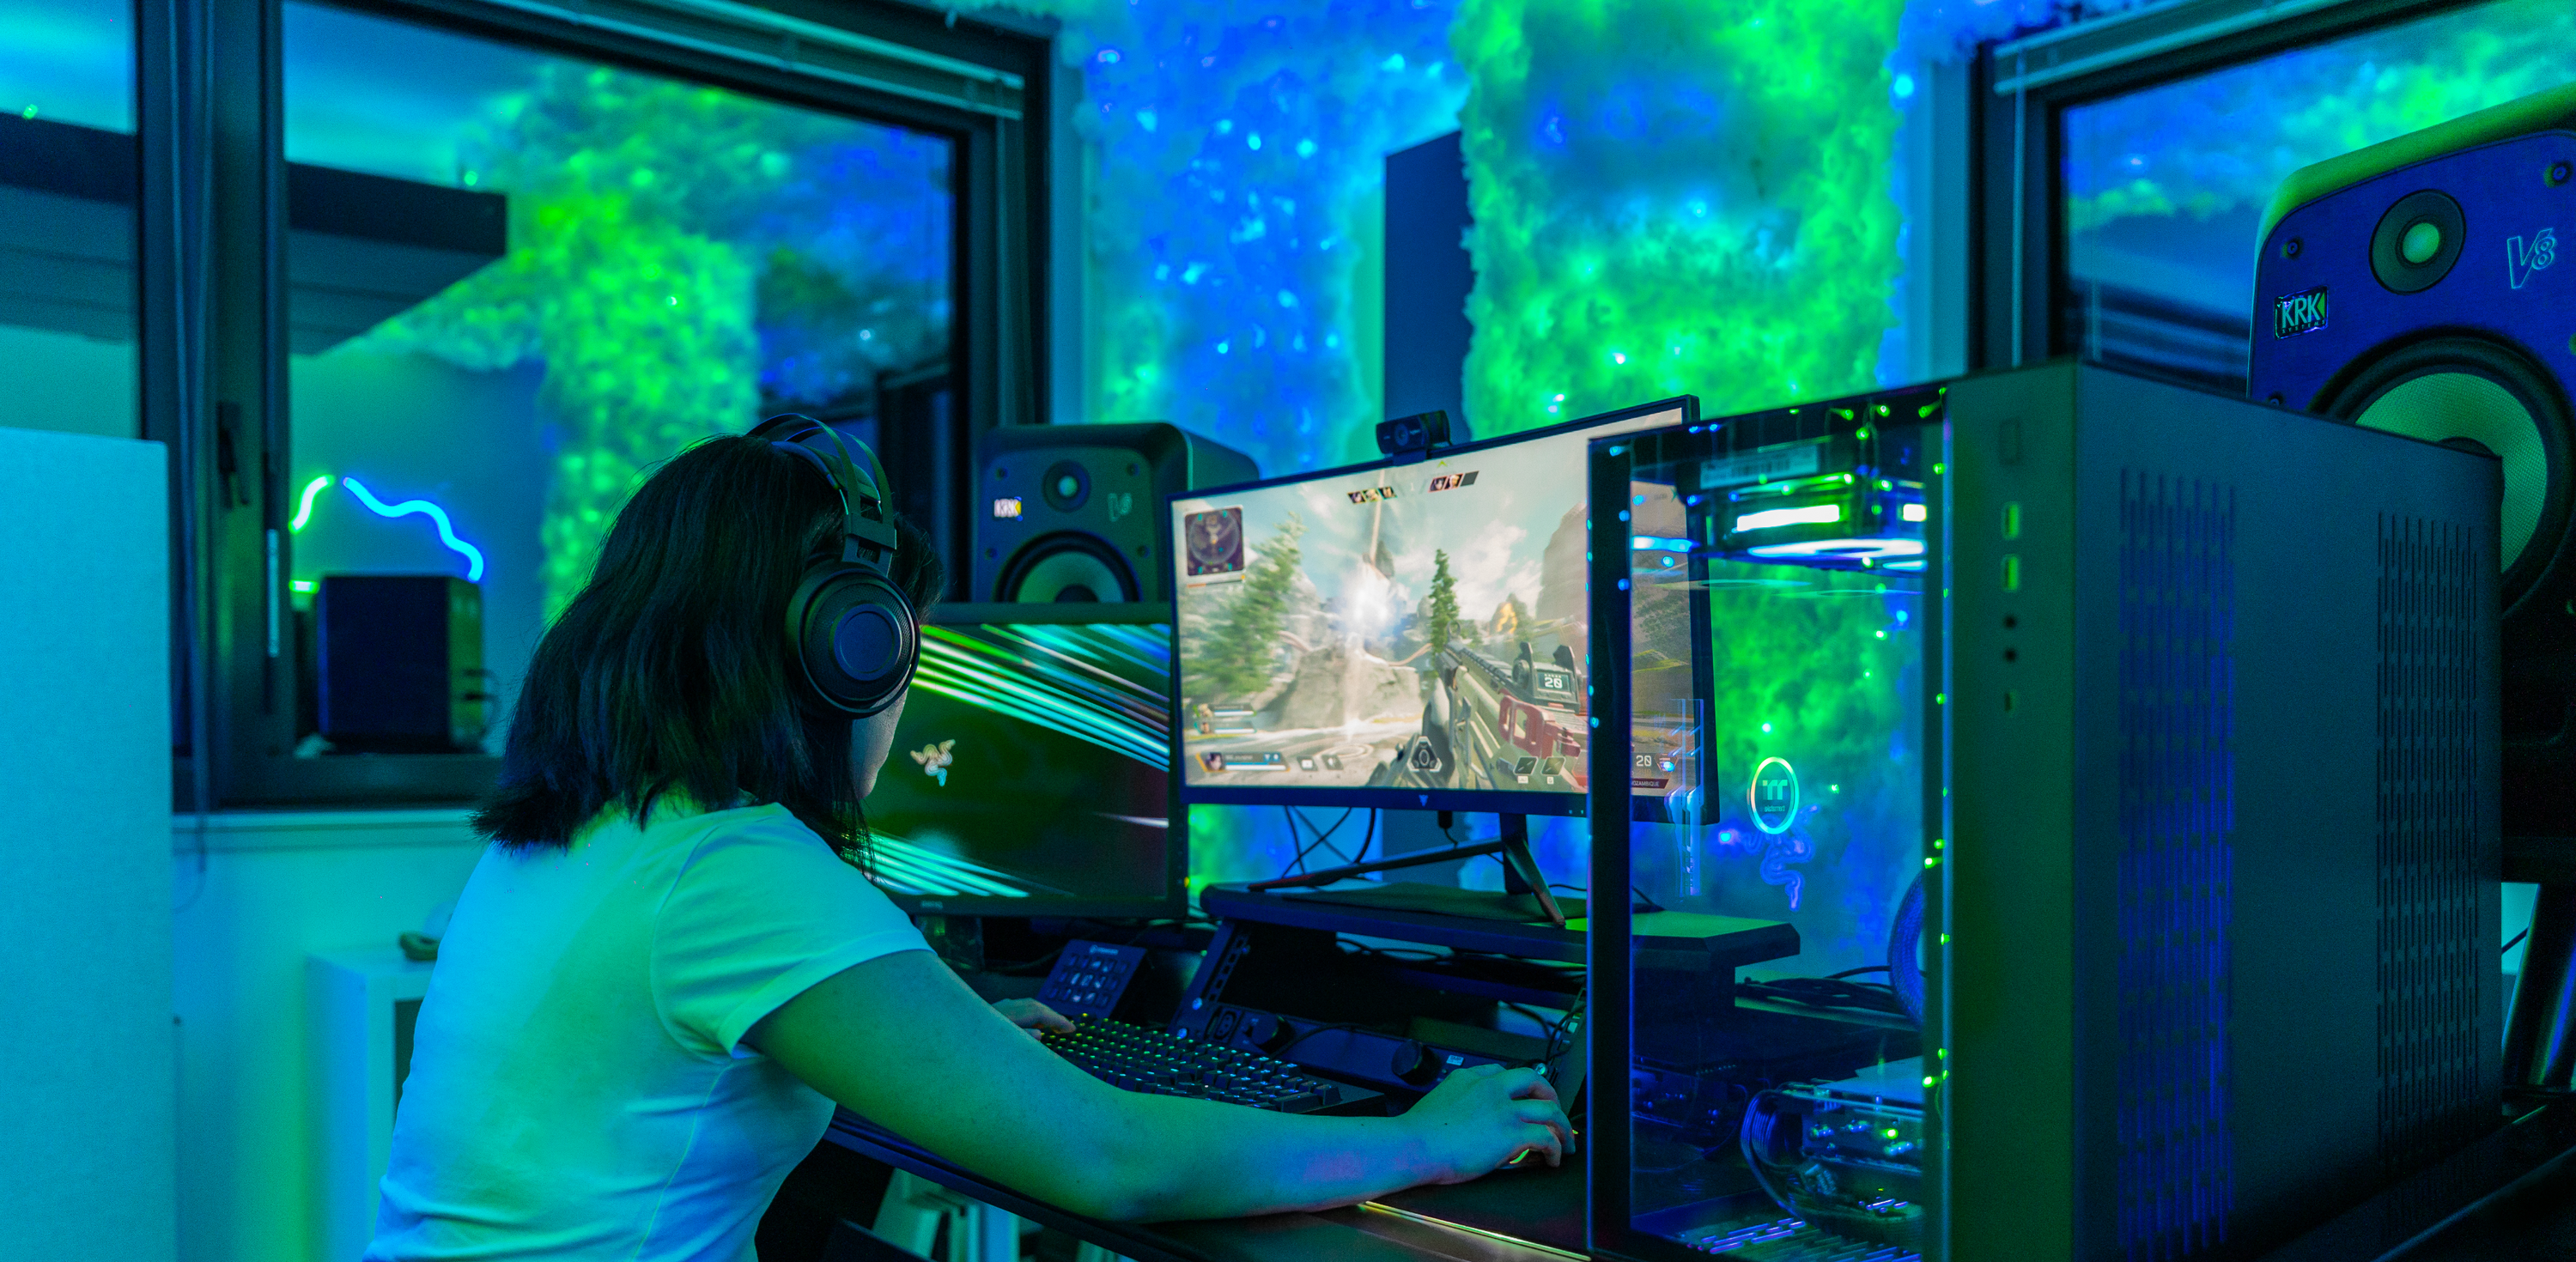 Twinkly For Gamers - Dynamic LED Lighting for Immersive Gaming